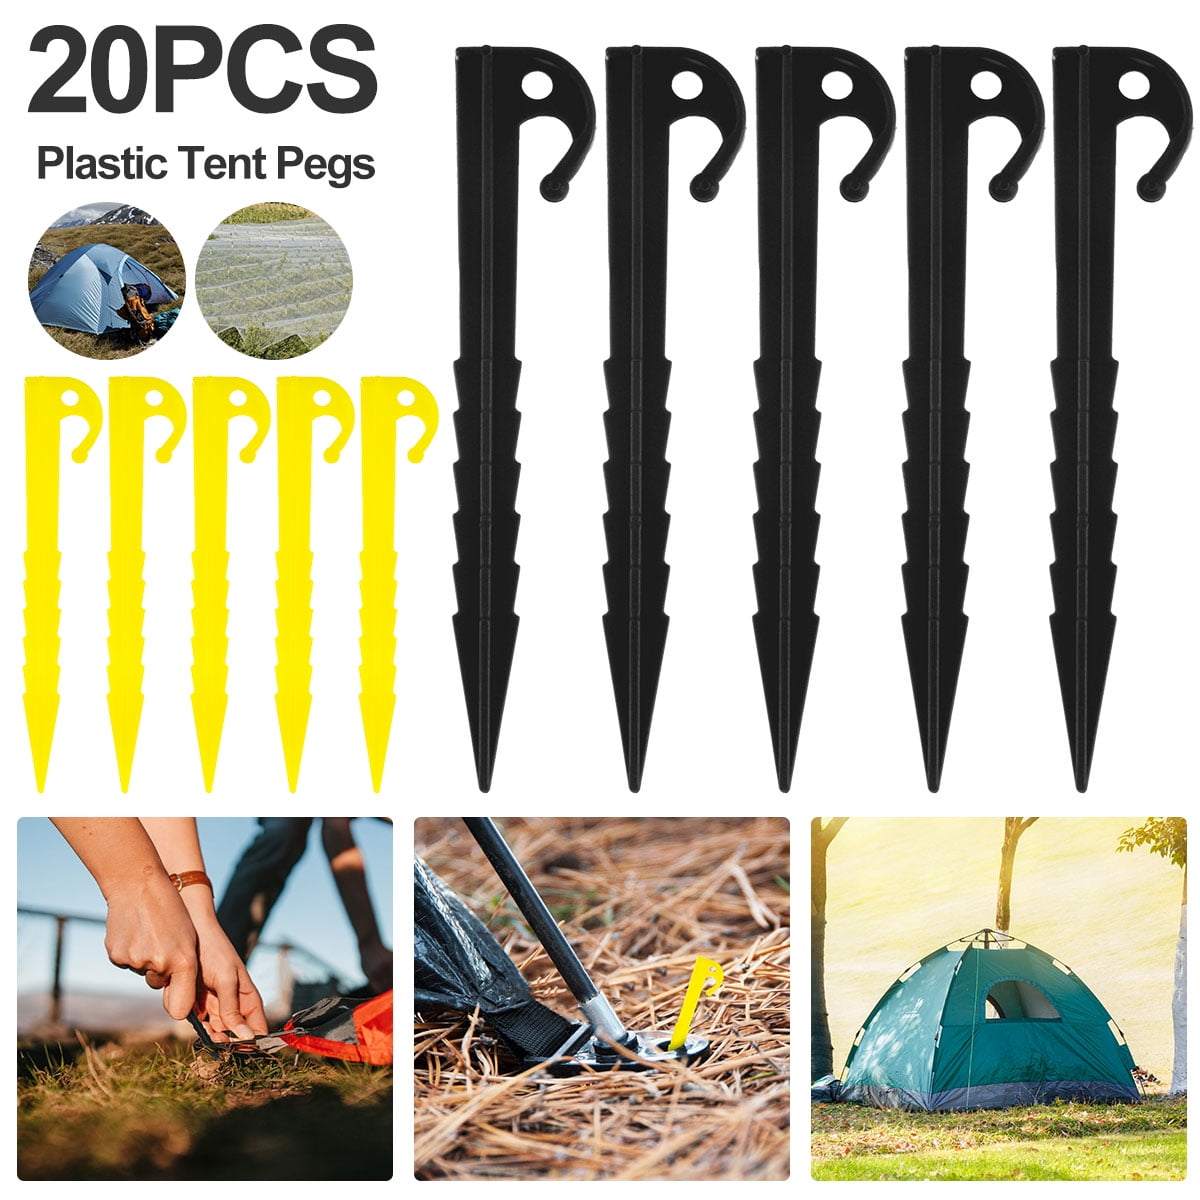 10PCS Ultralight Plastic Outdoor Camping Trip Tent Peg Ground Nail Stak FYC 